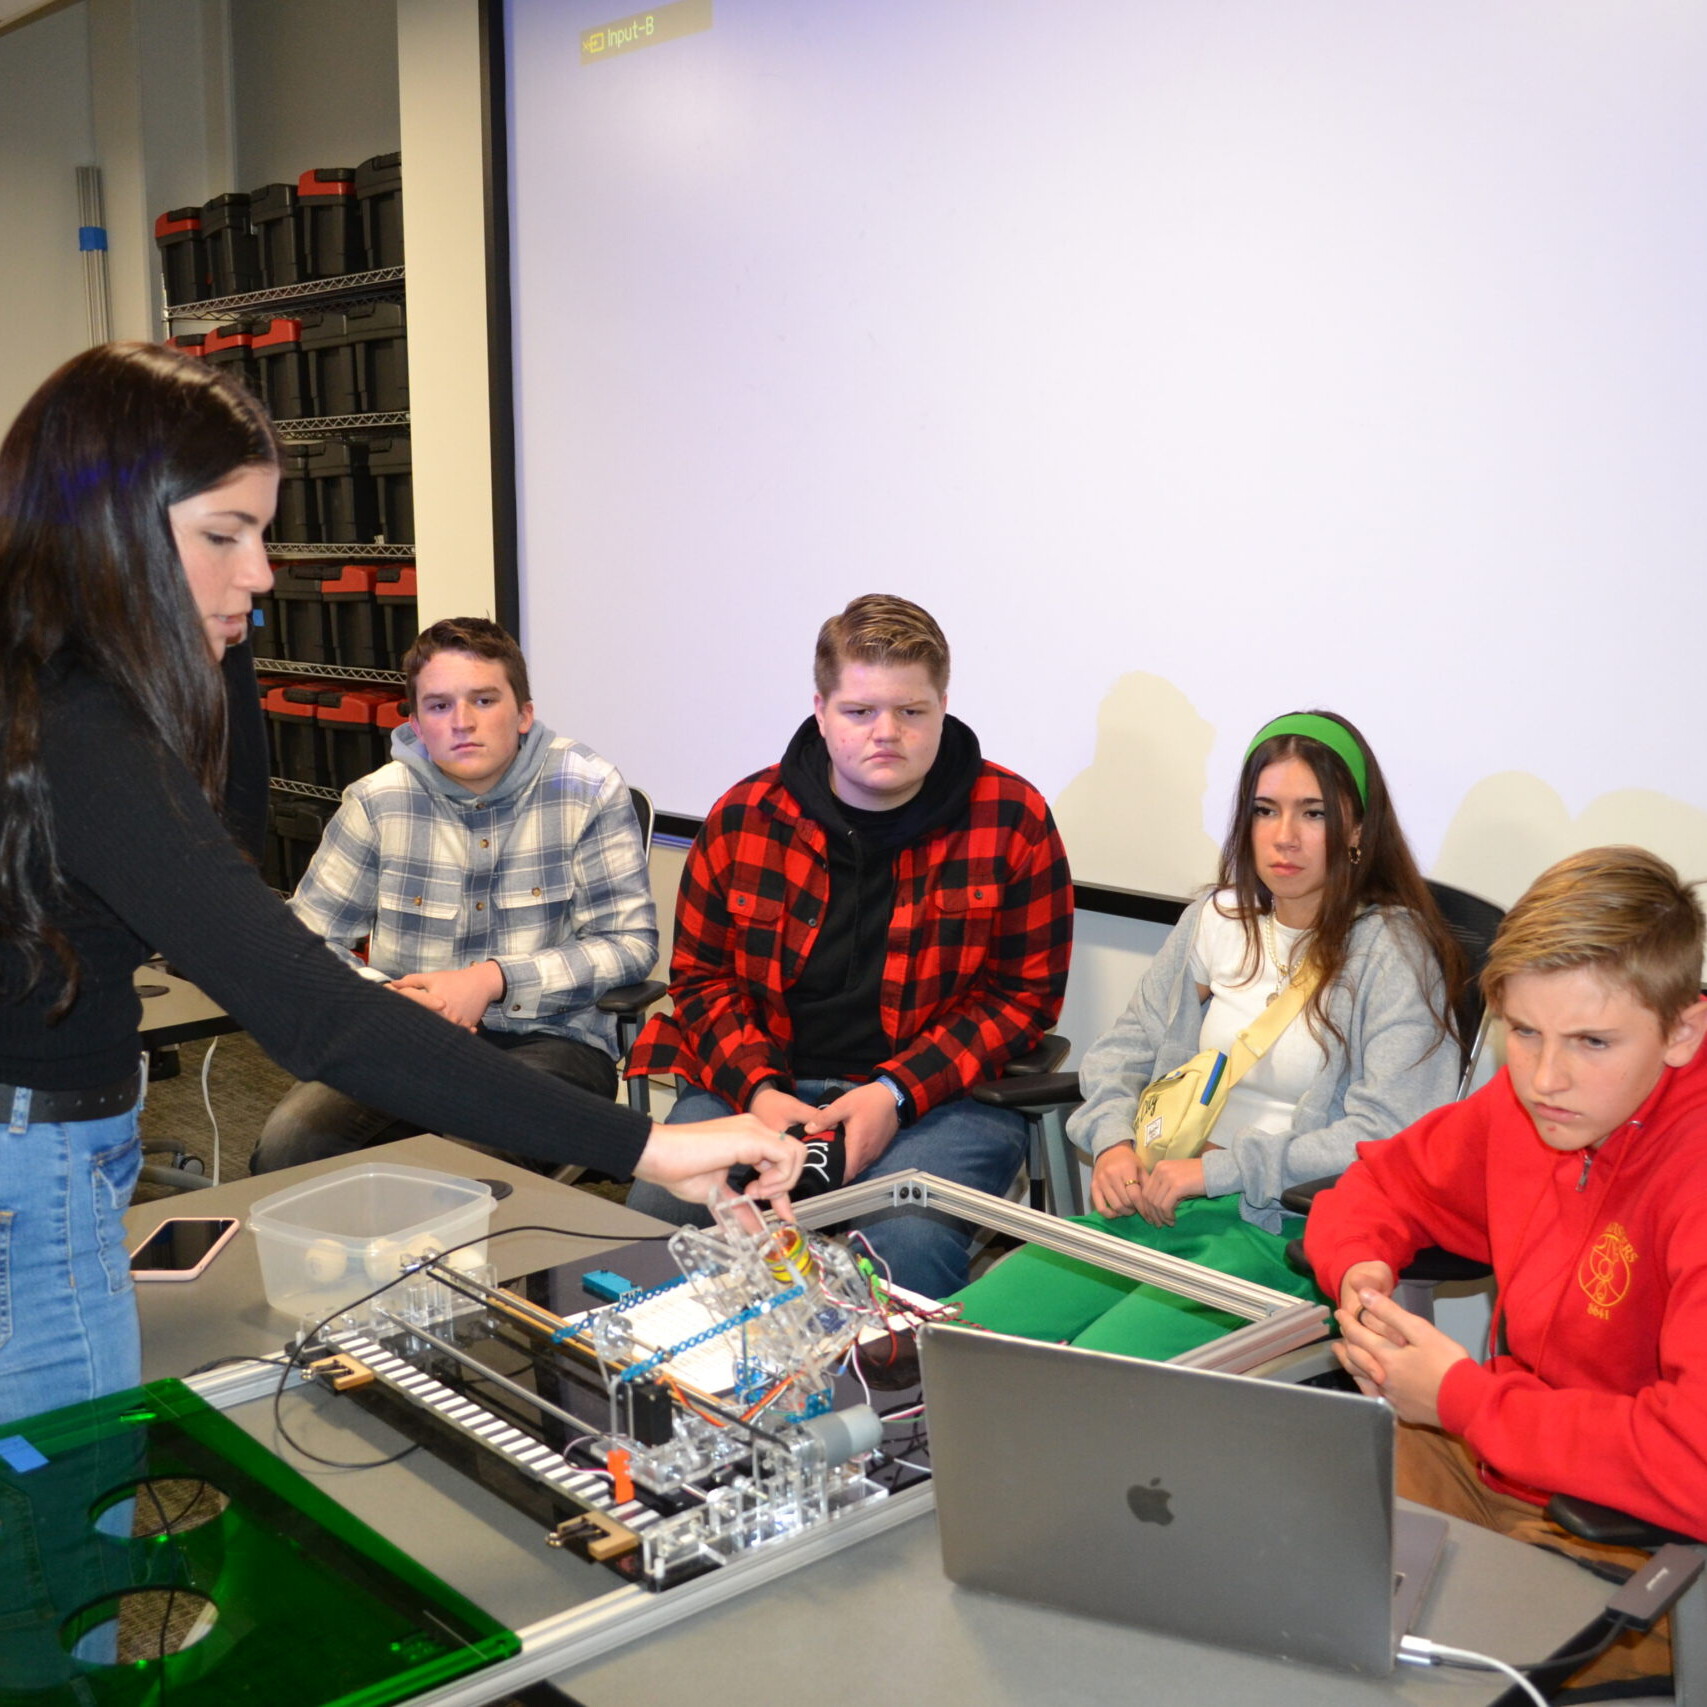 White woman with black hair shows four students electrical board